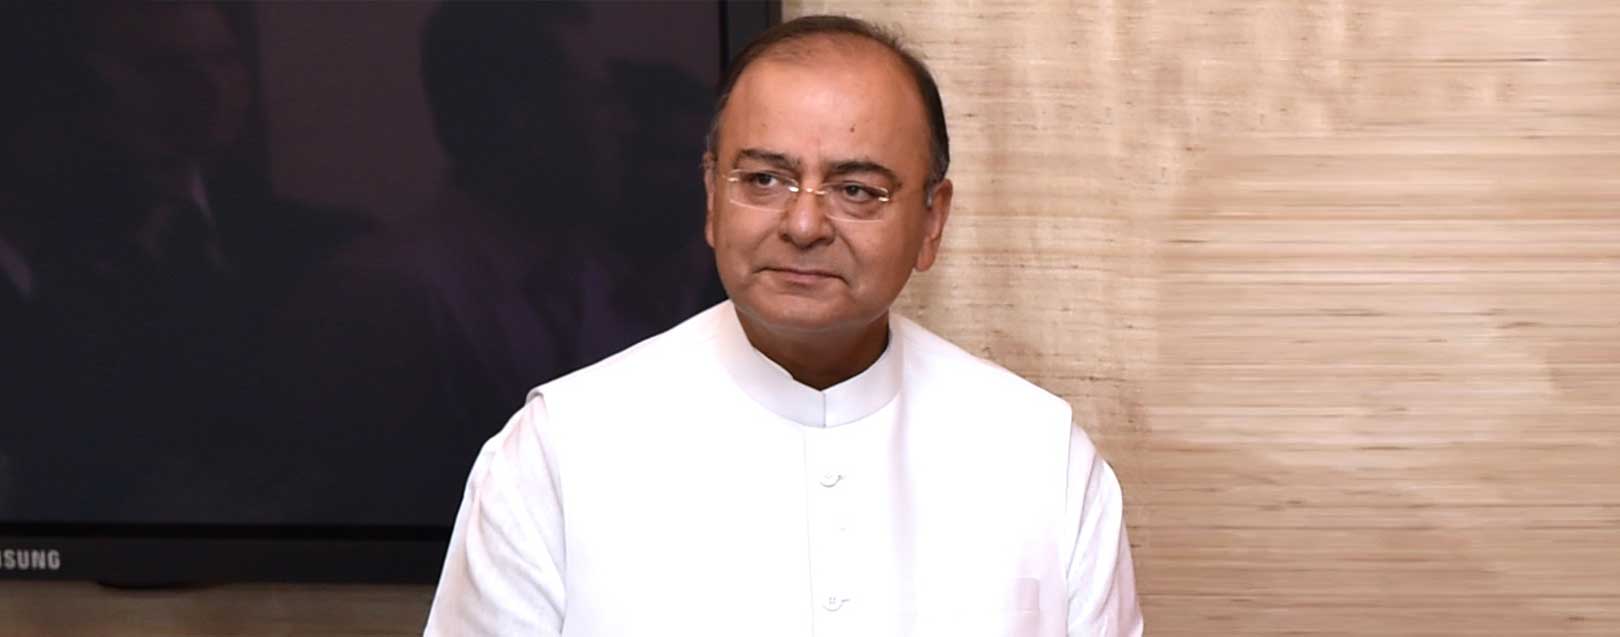 Trademark registration time to be reduced: Arun Jaitley